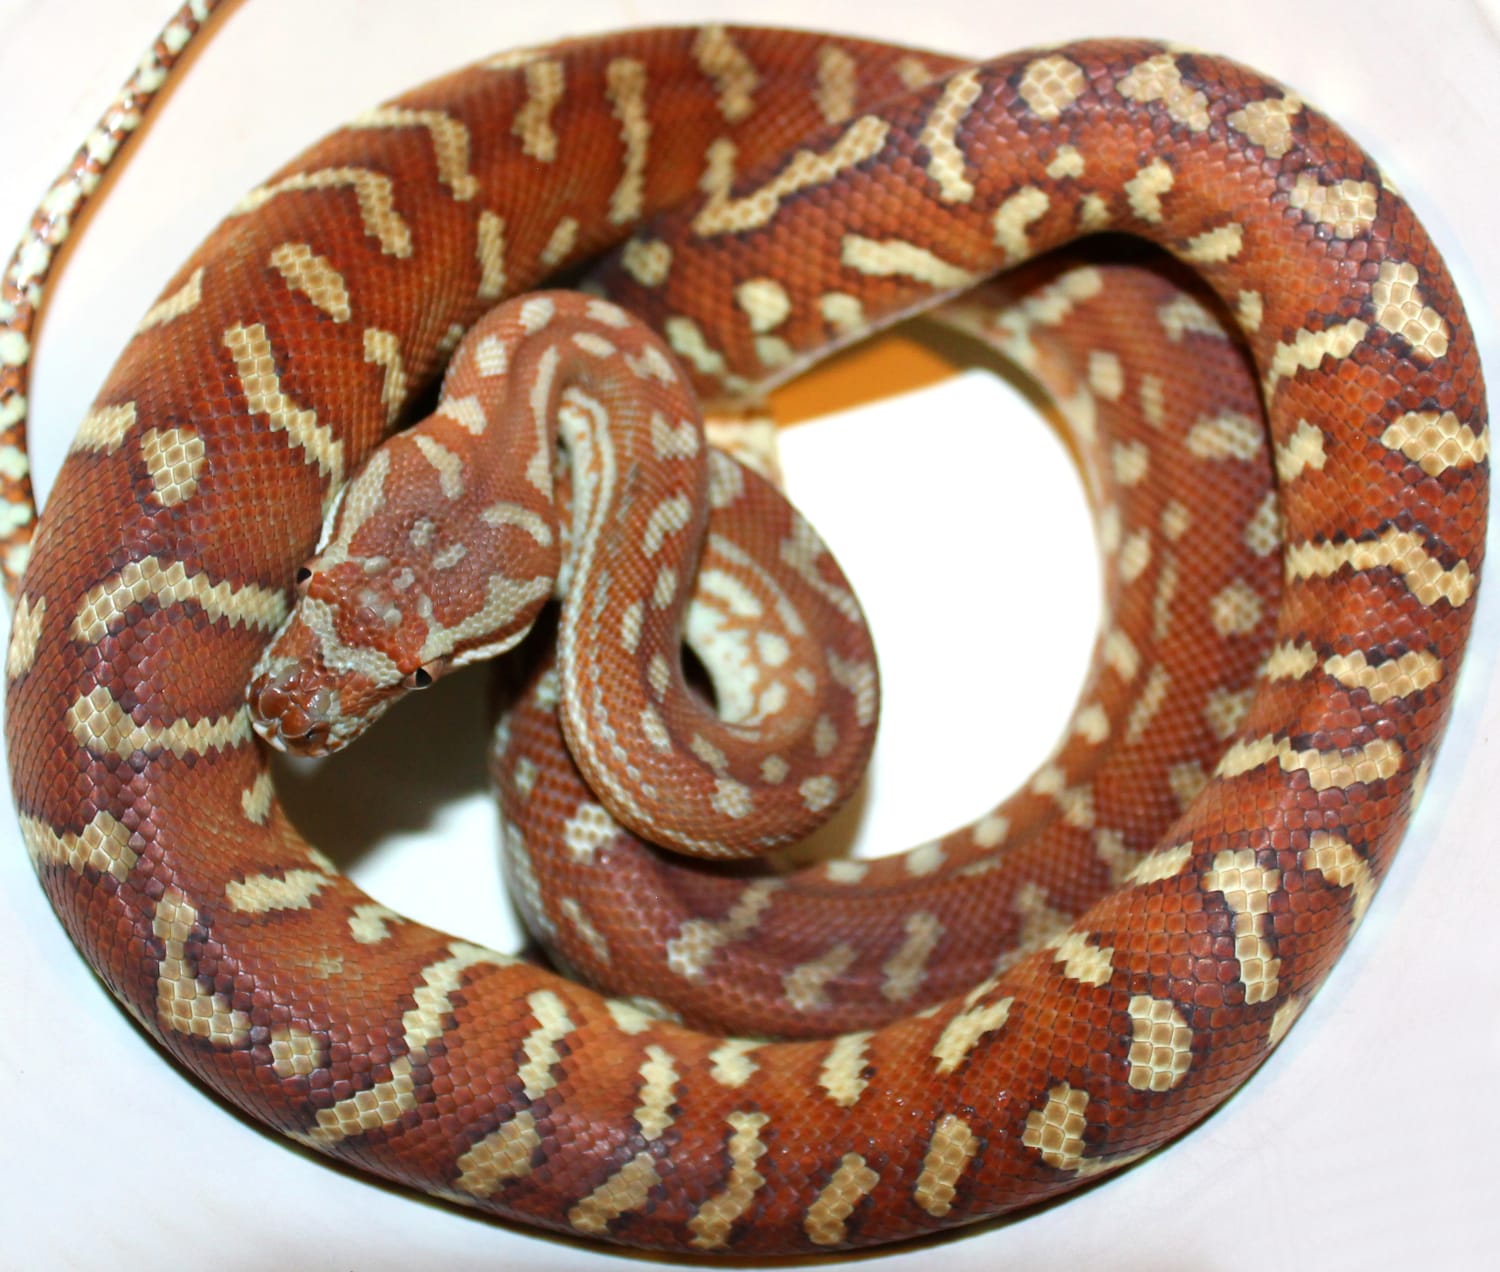 Full Blood Hypo Centralian Carpet Python by Inland Reptile